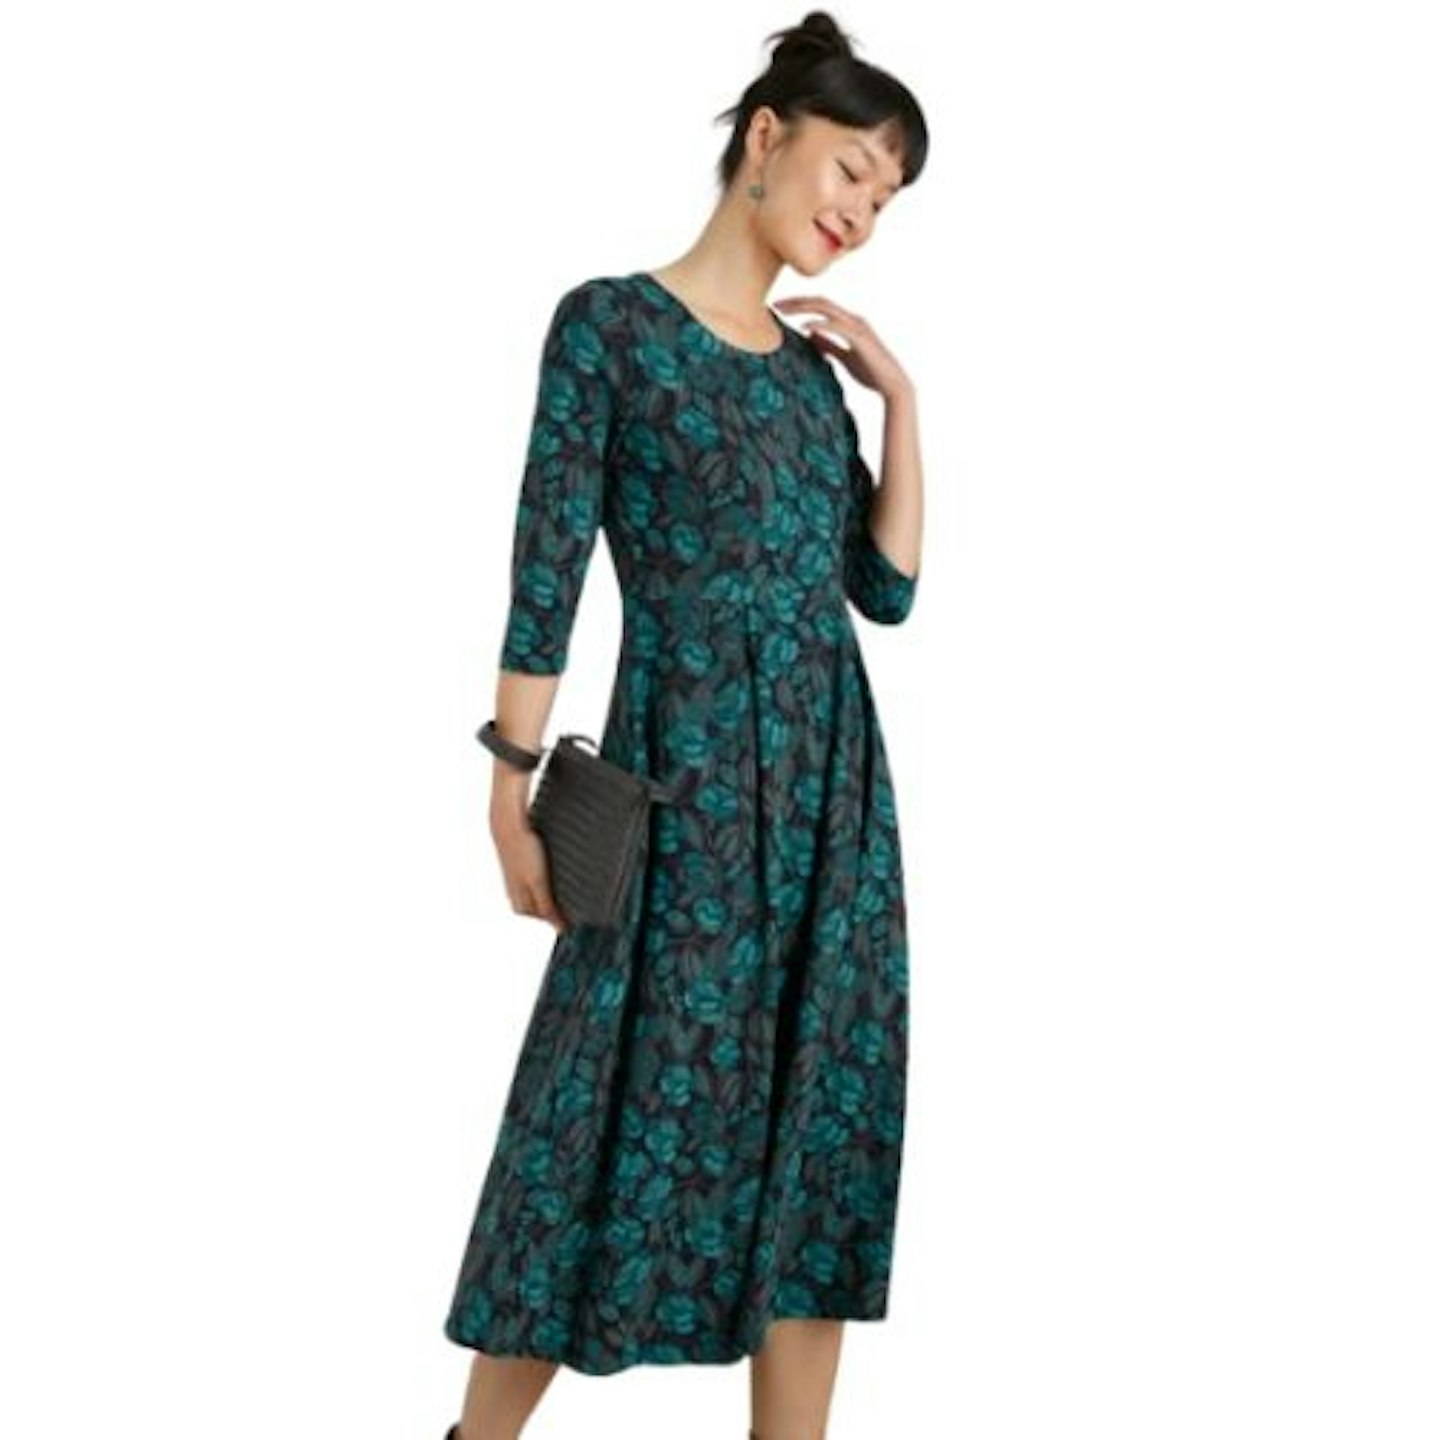 Ladies' dresses for over 50s that are flattering 2024